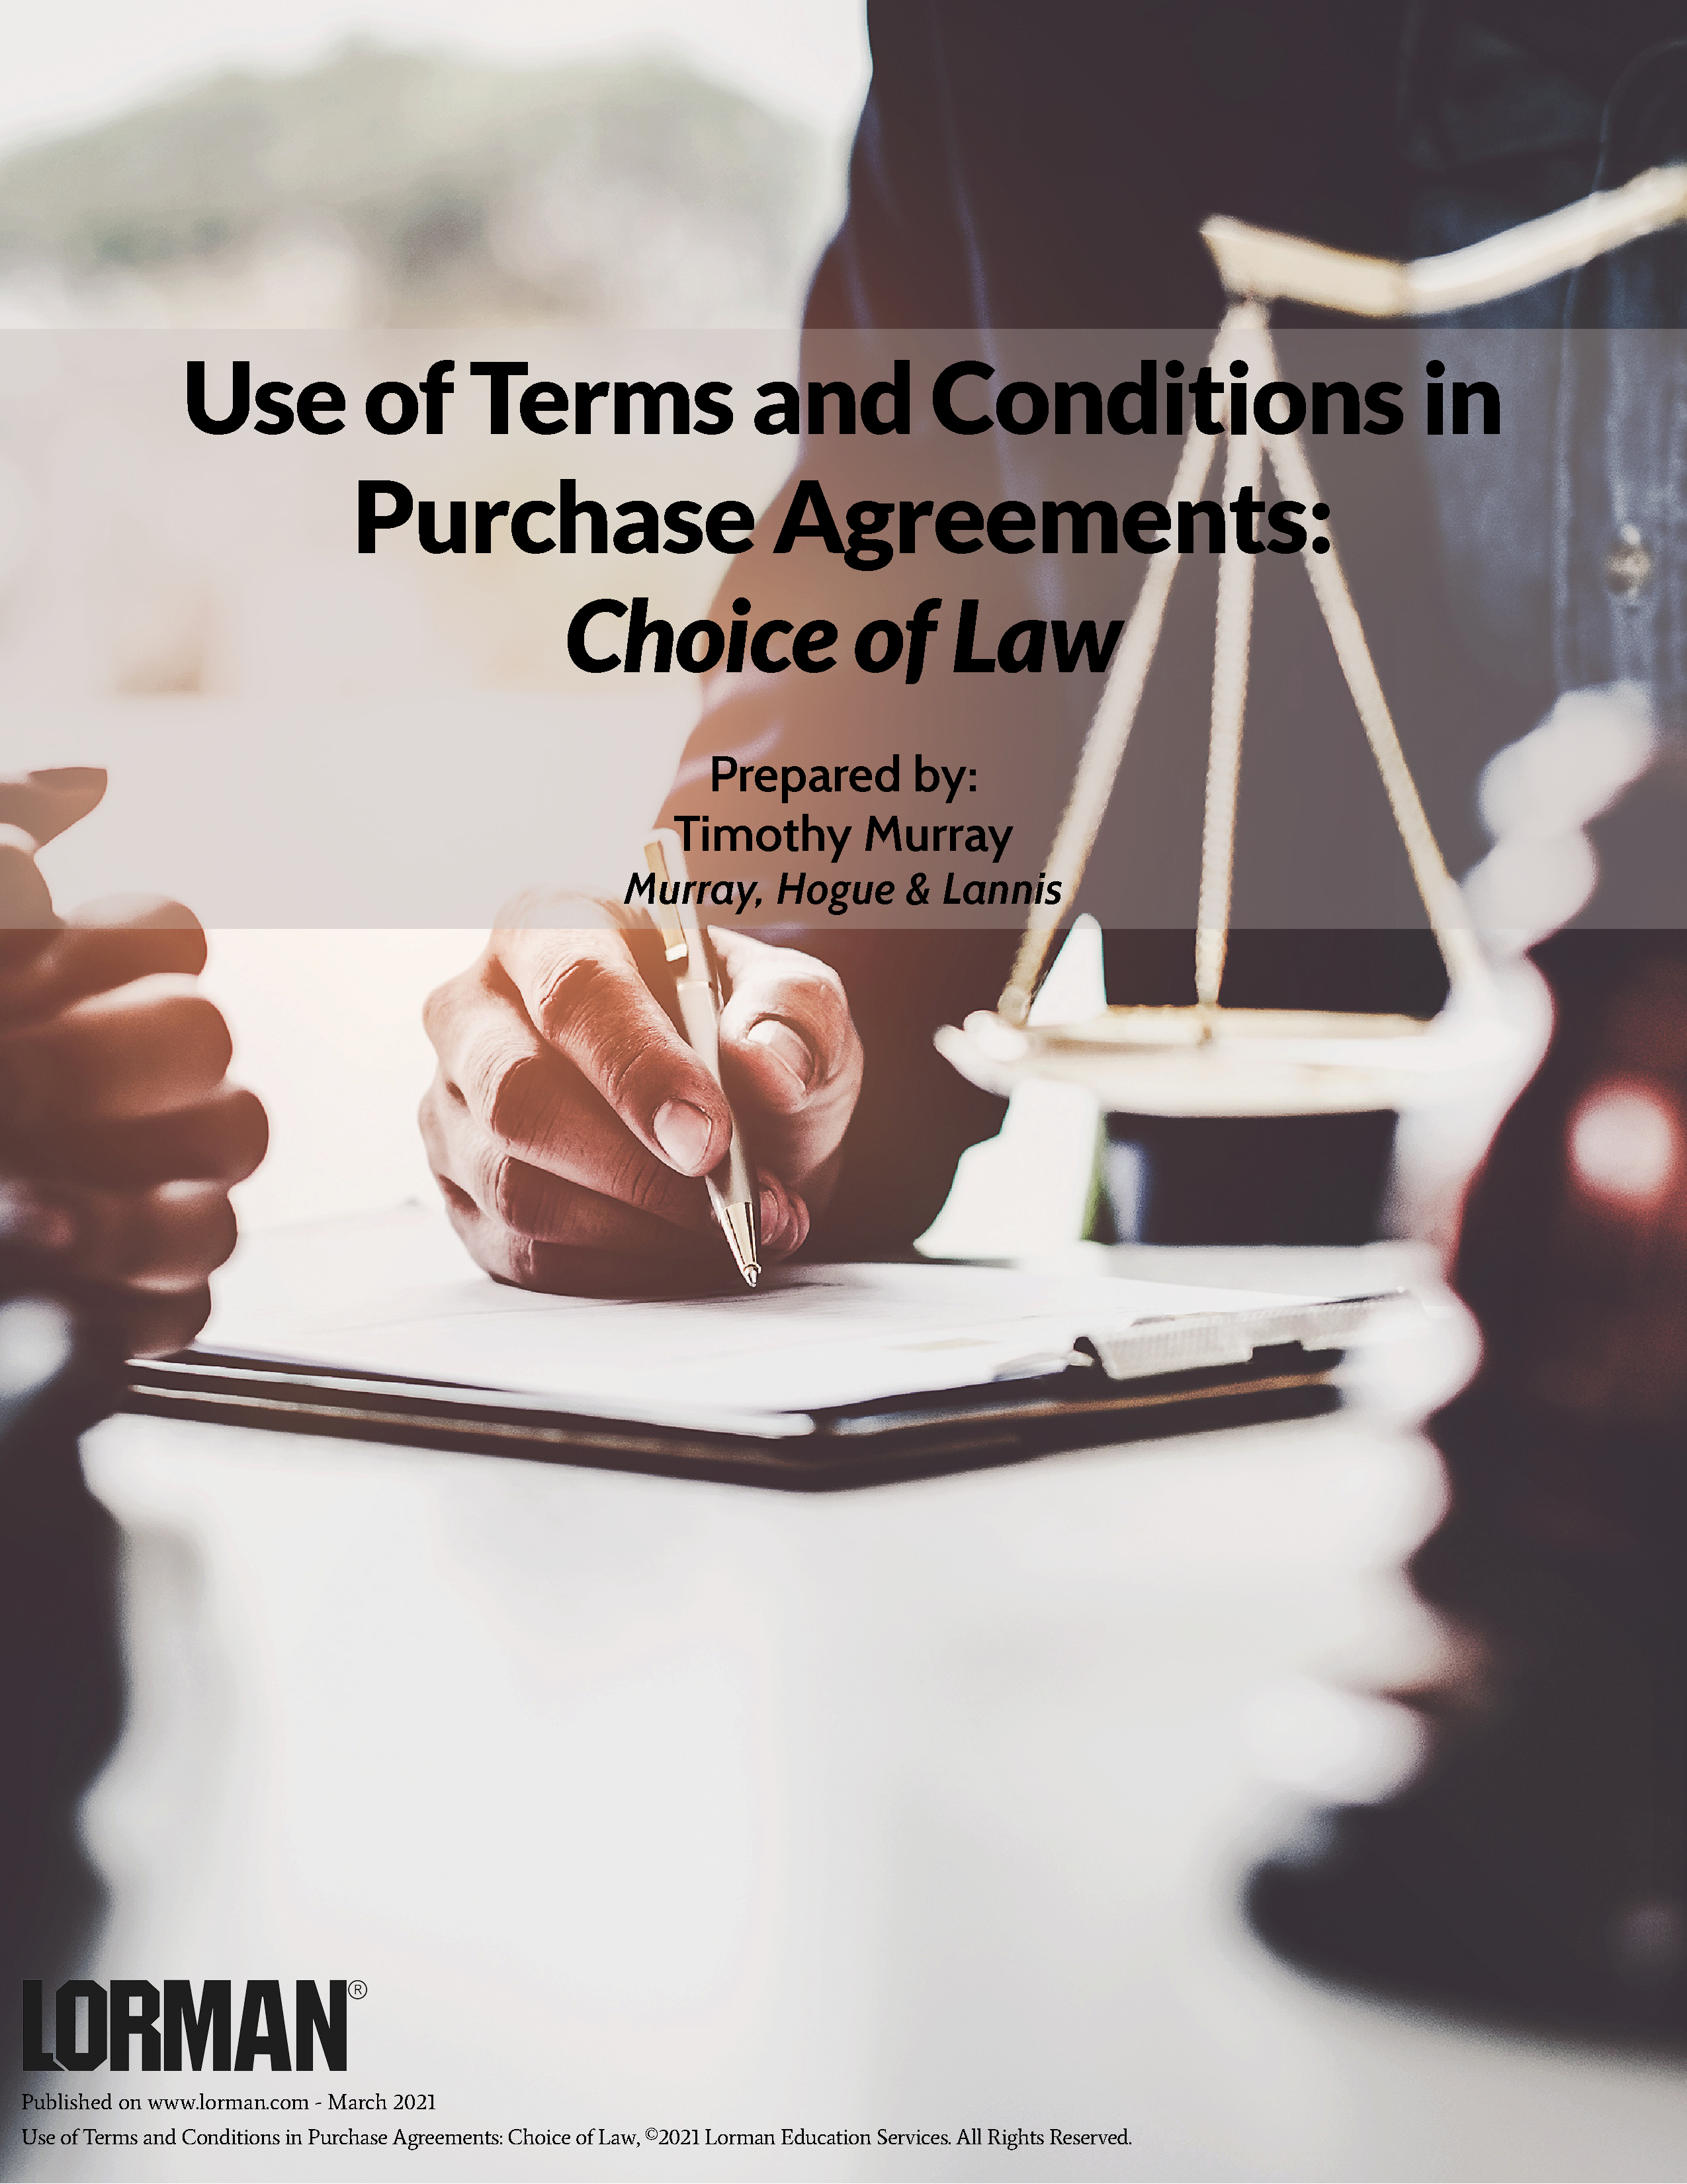 Use of Terms and Conditions in Purchase Agreements: Choice of Law